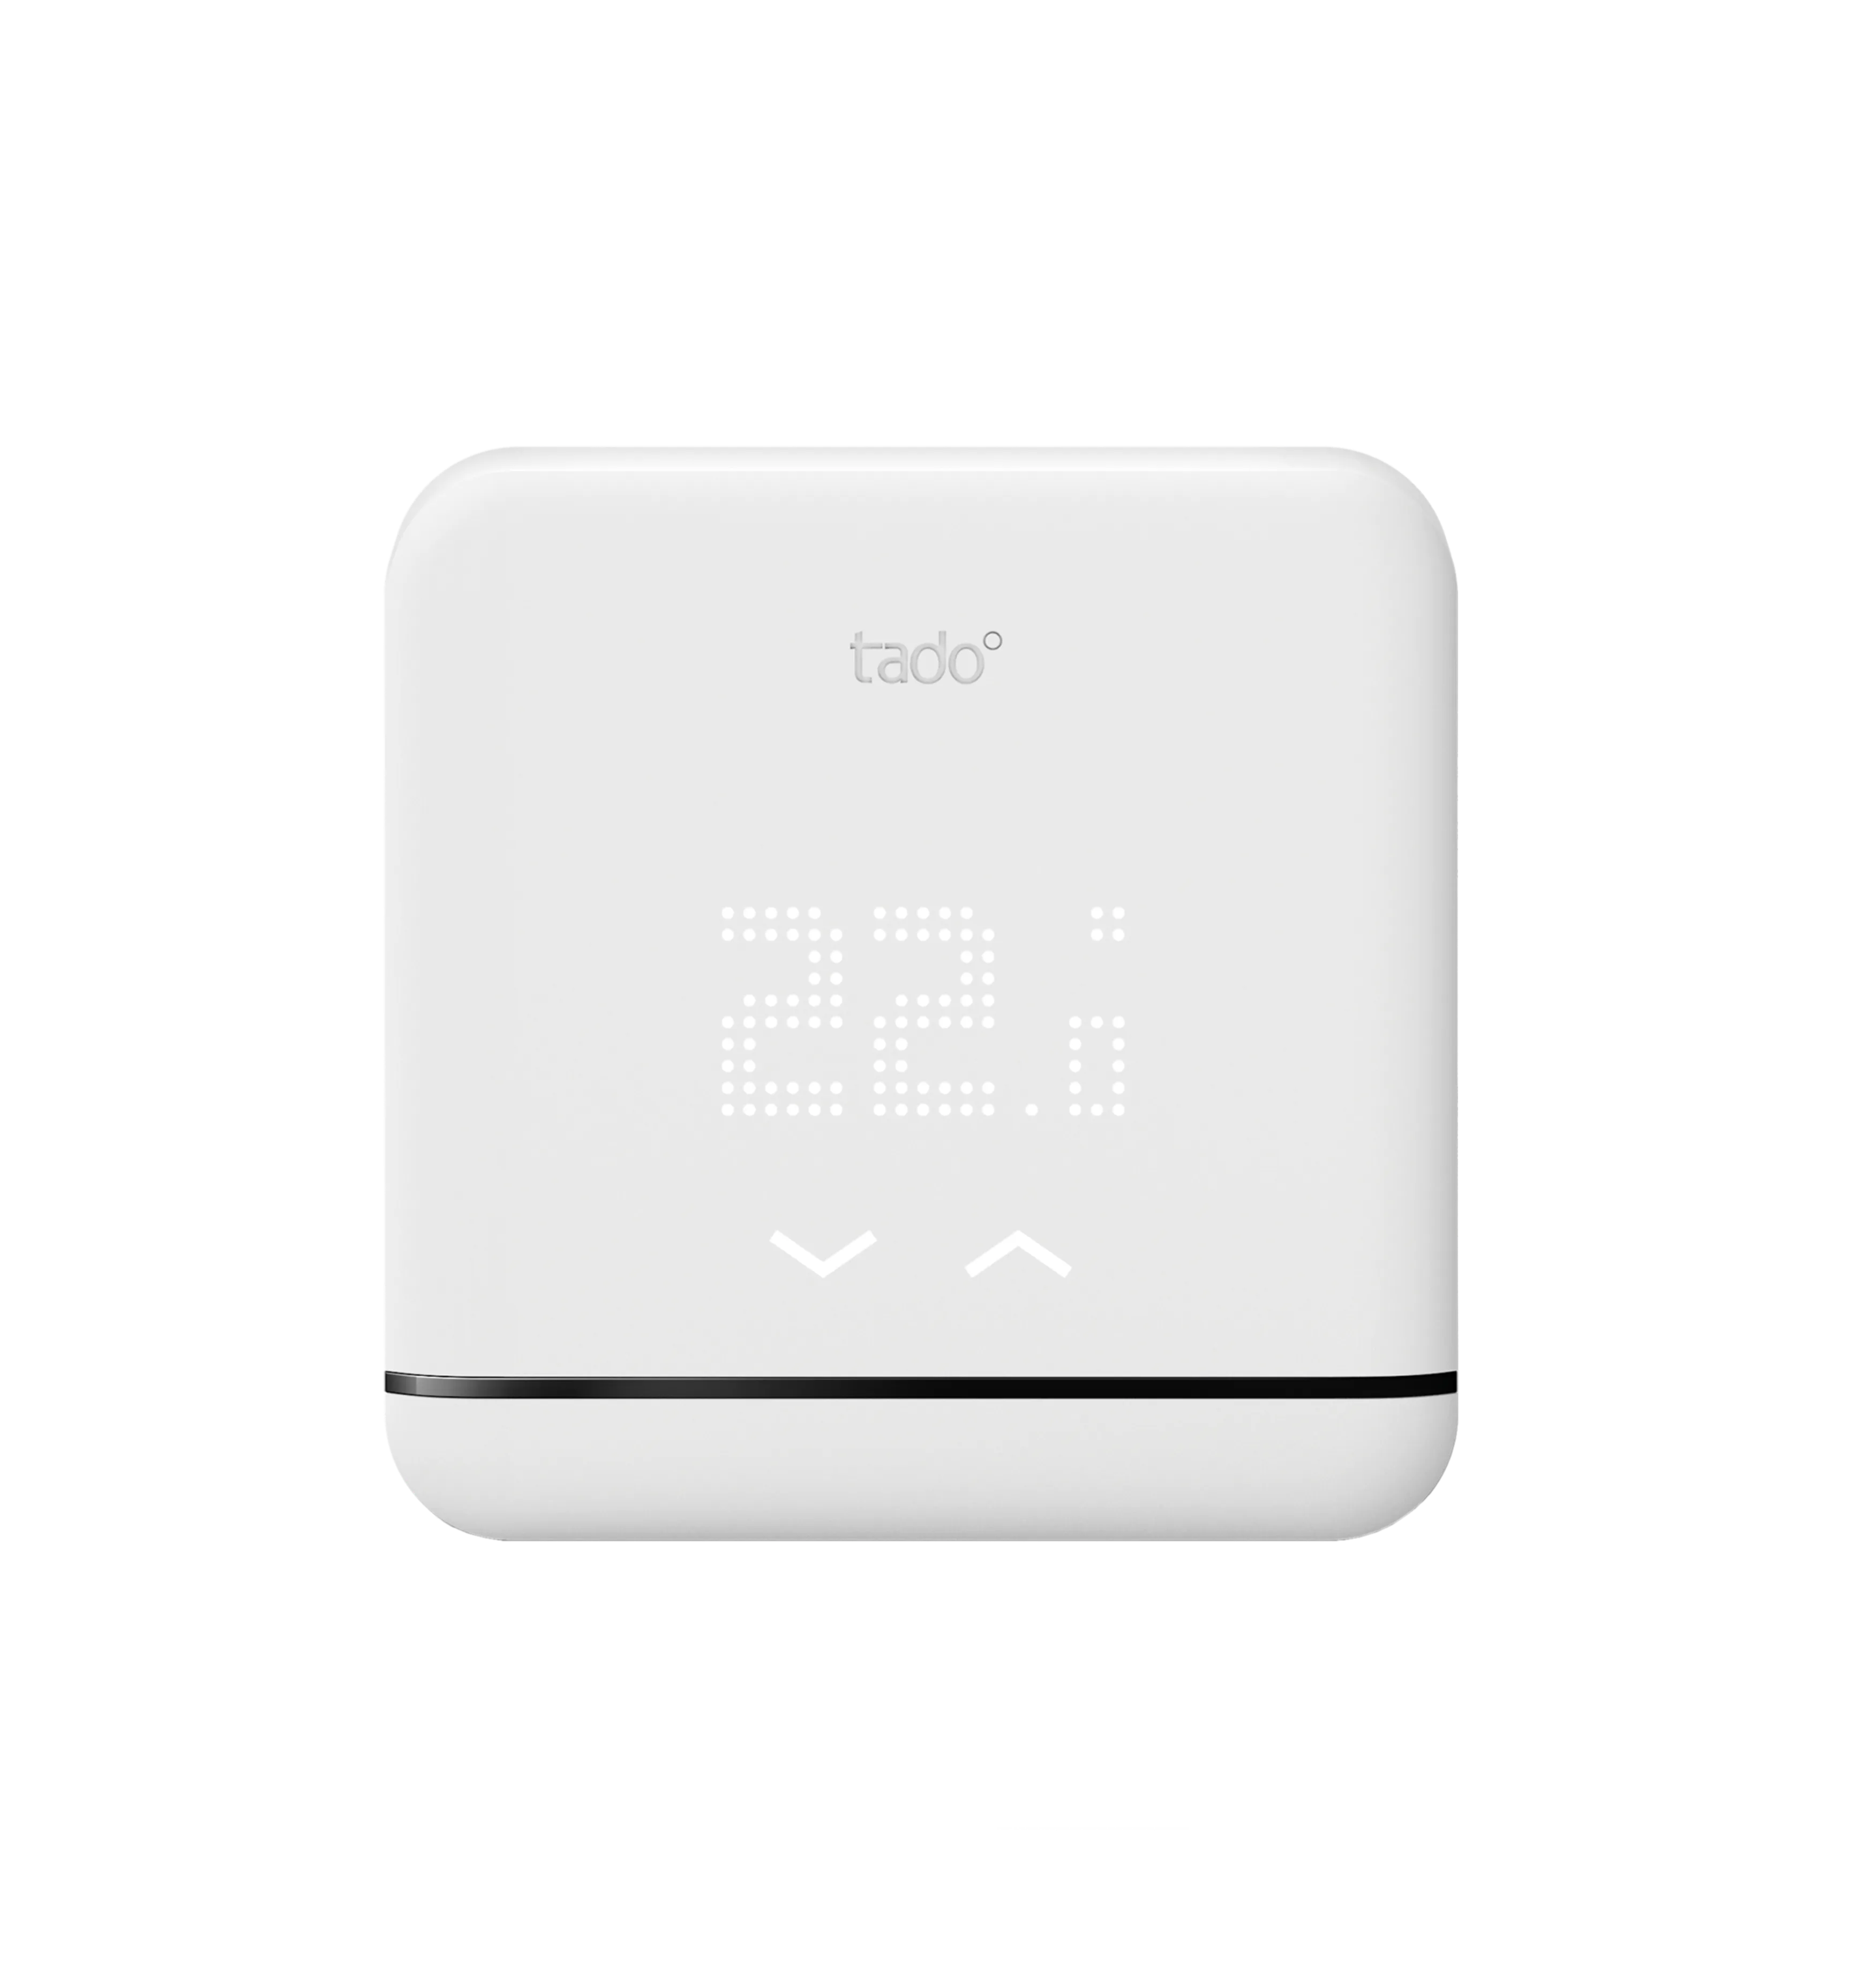 Tado smart AC control in front of a transparent background